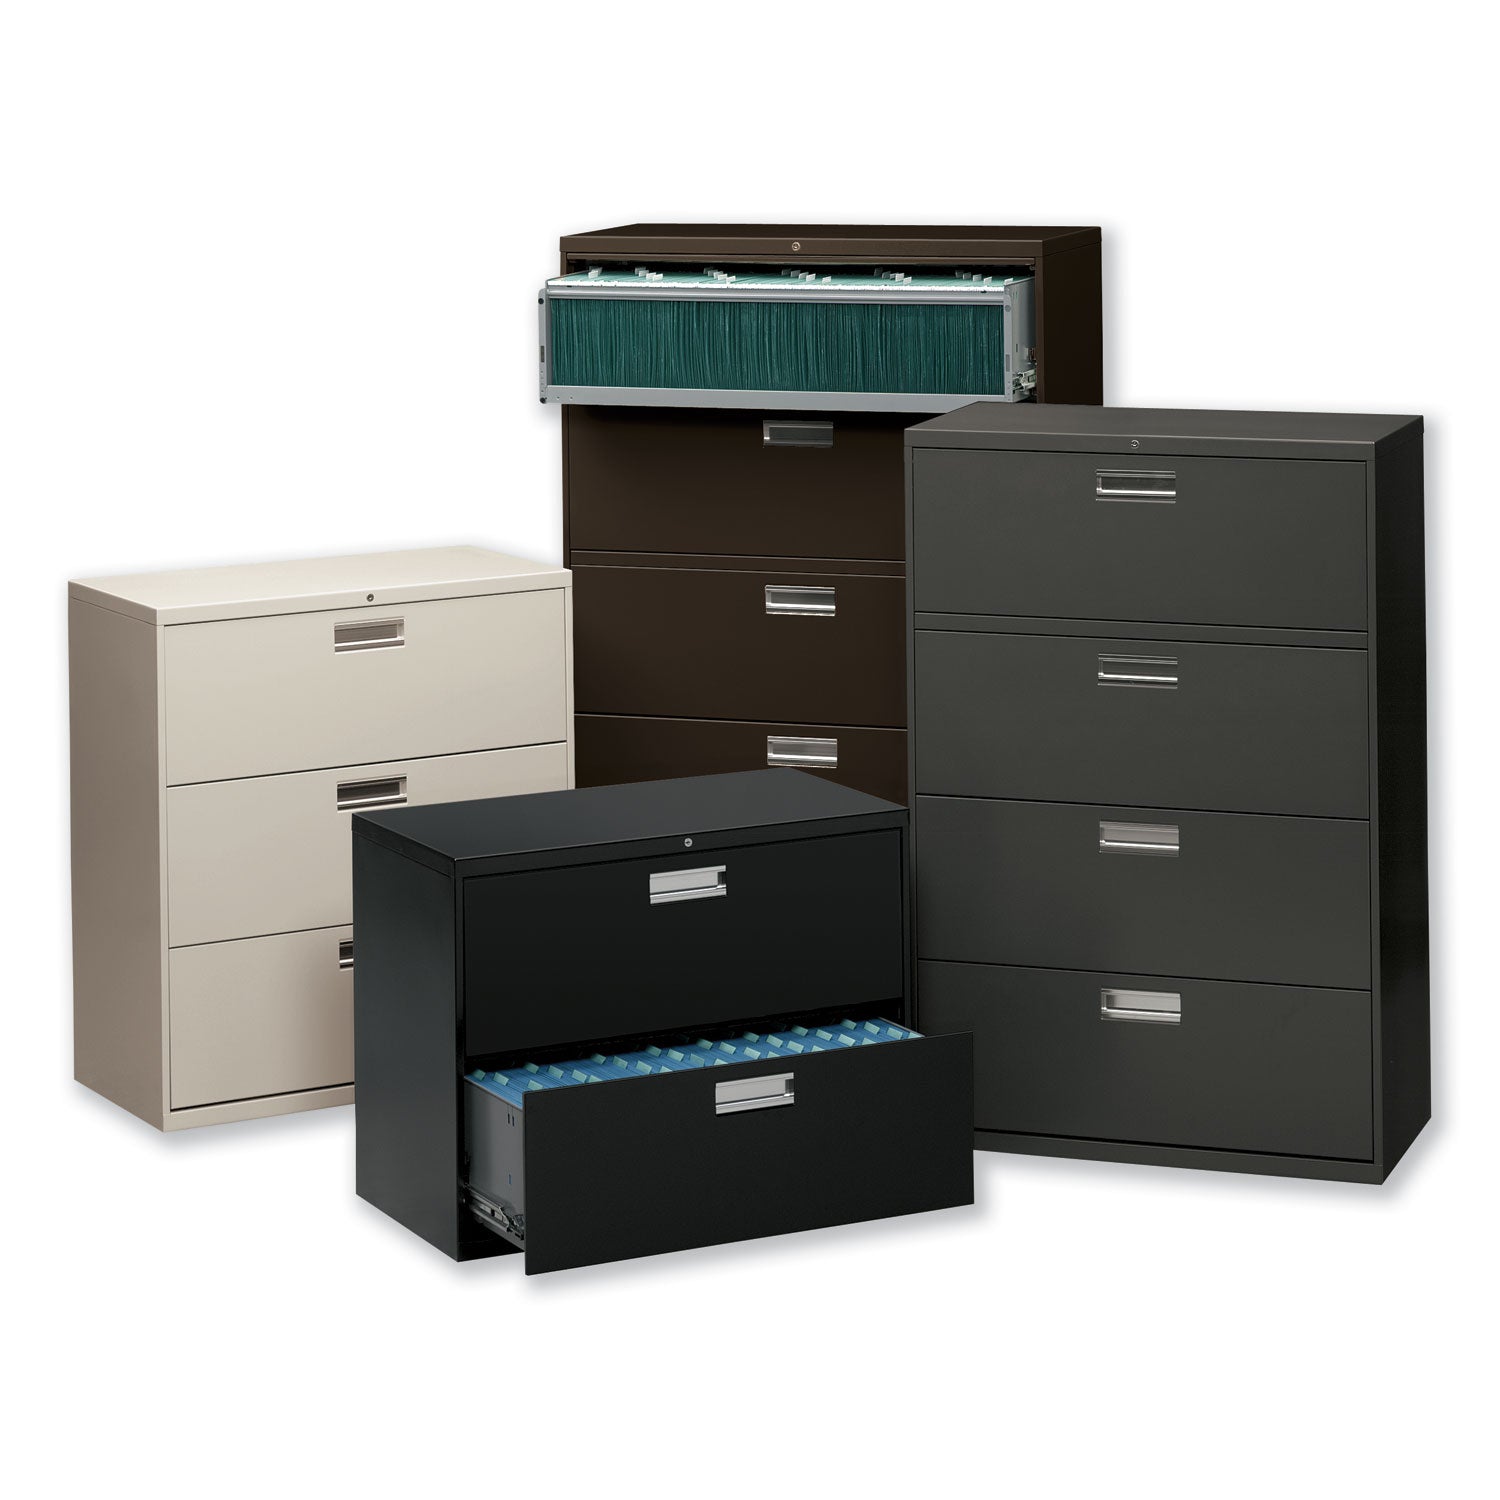 Brigade 600 Series Lateral File, 4 Legal/Letter-Size File Drawers, 1 Roll-Out File Shelf, Putty, 36" x 18" x 64.25 - 